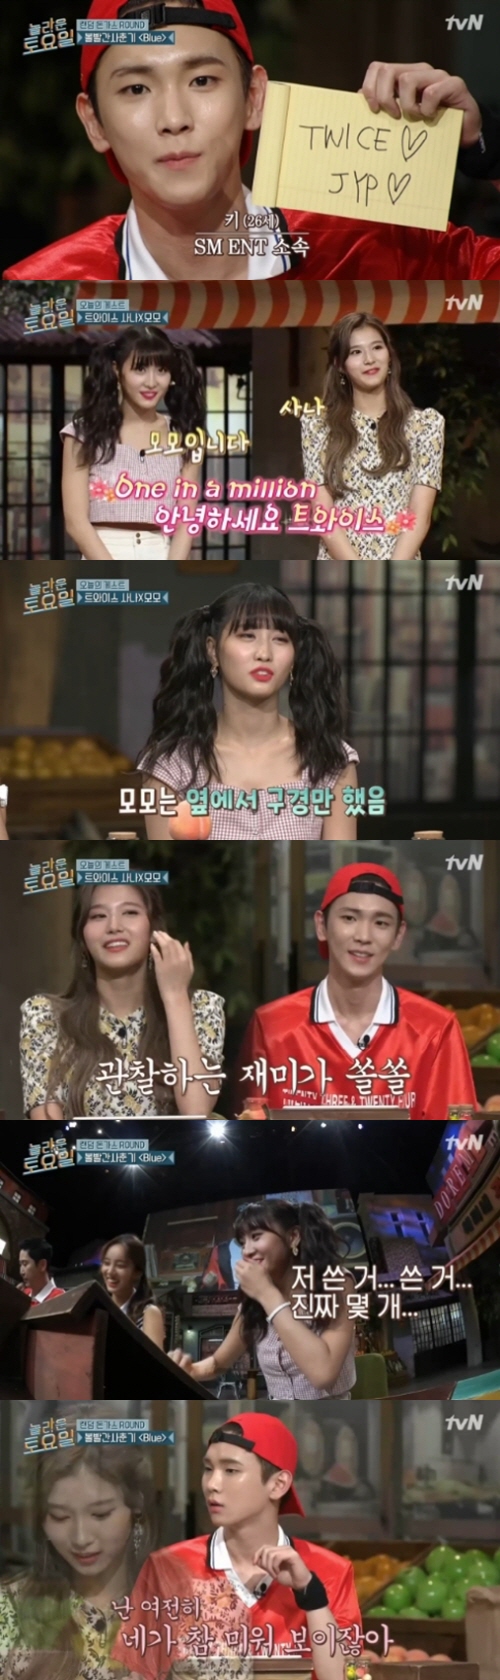 Amazing Saturday TWICE Sana and MO have struggledTWICE MOMO and Sana appeared on TVN Amazing Saturday broadcasted on the 4th, and they started to write food on the telephoto market.Key, Impression, and Year showed a pleasant smile when they saw TWICE. MOMO and Sana danced as soon as they appeared and gave off a refreshing charm.The members laughed, saying, Where is the navel? And It is so funny.Earlier, TWICE songs were quizzed. I was so confused about whether it was always or  because I was concentrating on our song.I was bored with the rain in the waiting room, so I listened to the song and played the lyrics. It was harder than I thought.On the other hand, MOMO said, I was watching, what was it doing? Key encouraged, Ill work harder and eat delicious things together, Ill applaud a lot and react.I dont know if you can do well today, but help me well, Sana said. Kee laughed.A blue of a red-eyed adolescent with random dongas came out as a quiz; Sana hoped for a song from a red-eyed puberty, but was unconfident in the lyrics.MOMO also panicked when she heard the melody, saying, Is it already over? Sana thought of the word blue and Moon Se-yoon praised it as smart.Key said its the right answer for every answer Sana says, with Boom teasing, Thats what we decide.MOMO and Sana were divided into you and I, and they were in conflict. MOMO asked to decide MOMOpa and Sanapa.MOMO wrote the correct answer and the members cheered; the members turned the ball to each other and ate the pork gas deliciously.The next Food is a Pong-Kwaja smoothie. Your eye-nosed puzzle started and Hye-ri straightened out the makeshift. Key hit Justin Timberlake, year hit the fire.Shin Dong-yup shouted Yang Hyun-seok, who was surprised, saying, How do you fit this? MOMO regretted, I knew.Sana hit Kimura Takuya and tasted the smoothie: Its so delicious, she liked. MOMO finally took the smoothie, too. The answer was Lekas member boom.The singer is a fanatic icon at kindergarten and elementary school after the surprise Maratang. Rhythmta, released in 2015, is ready. What do you do with this, Sana said, standing up.The MOMO scooped for the second attempt, and laughed at the regrets in the words of Huh-hwi and Hwi-hwi; and wrote the correct answer in neat handwriting.Even with the worry of pronunciation, he fluently recited the year and the regret that Kee claimed; however, Shin Dong-yup, who pushed the wrong and regret, was sorry.Photo: TVN broadcast screen